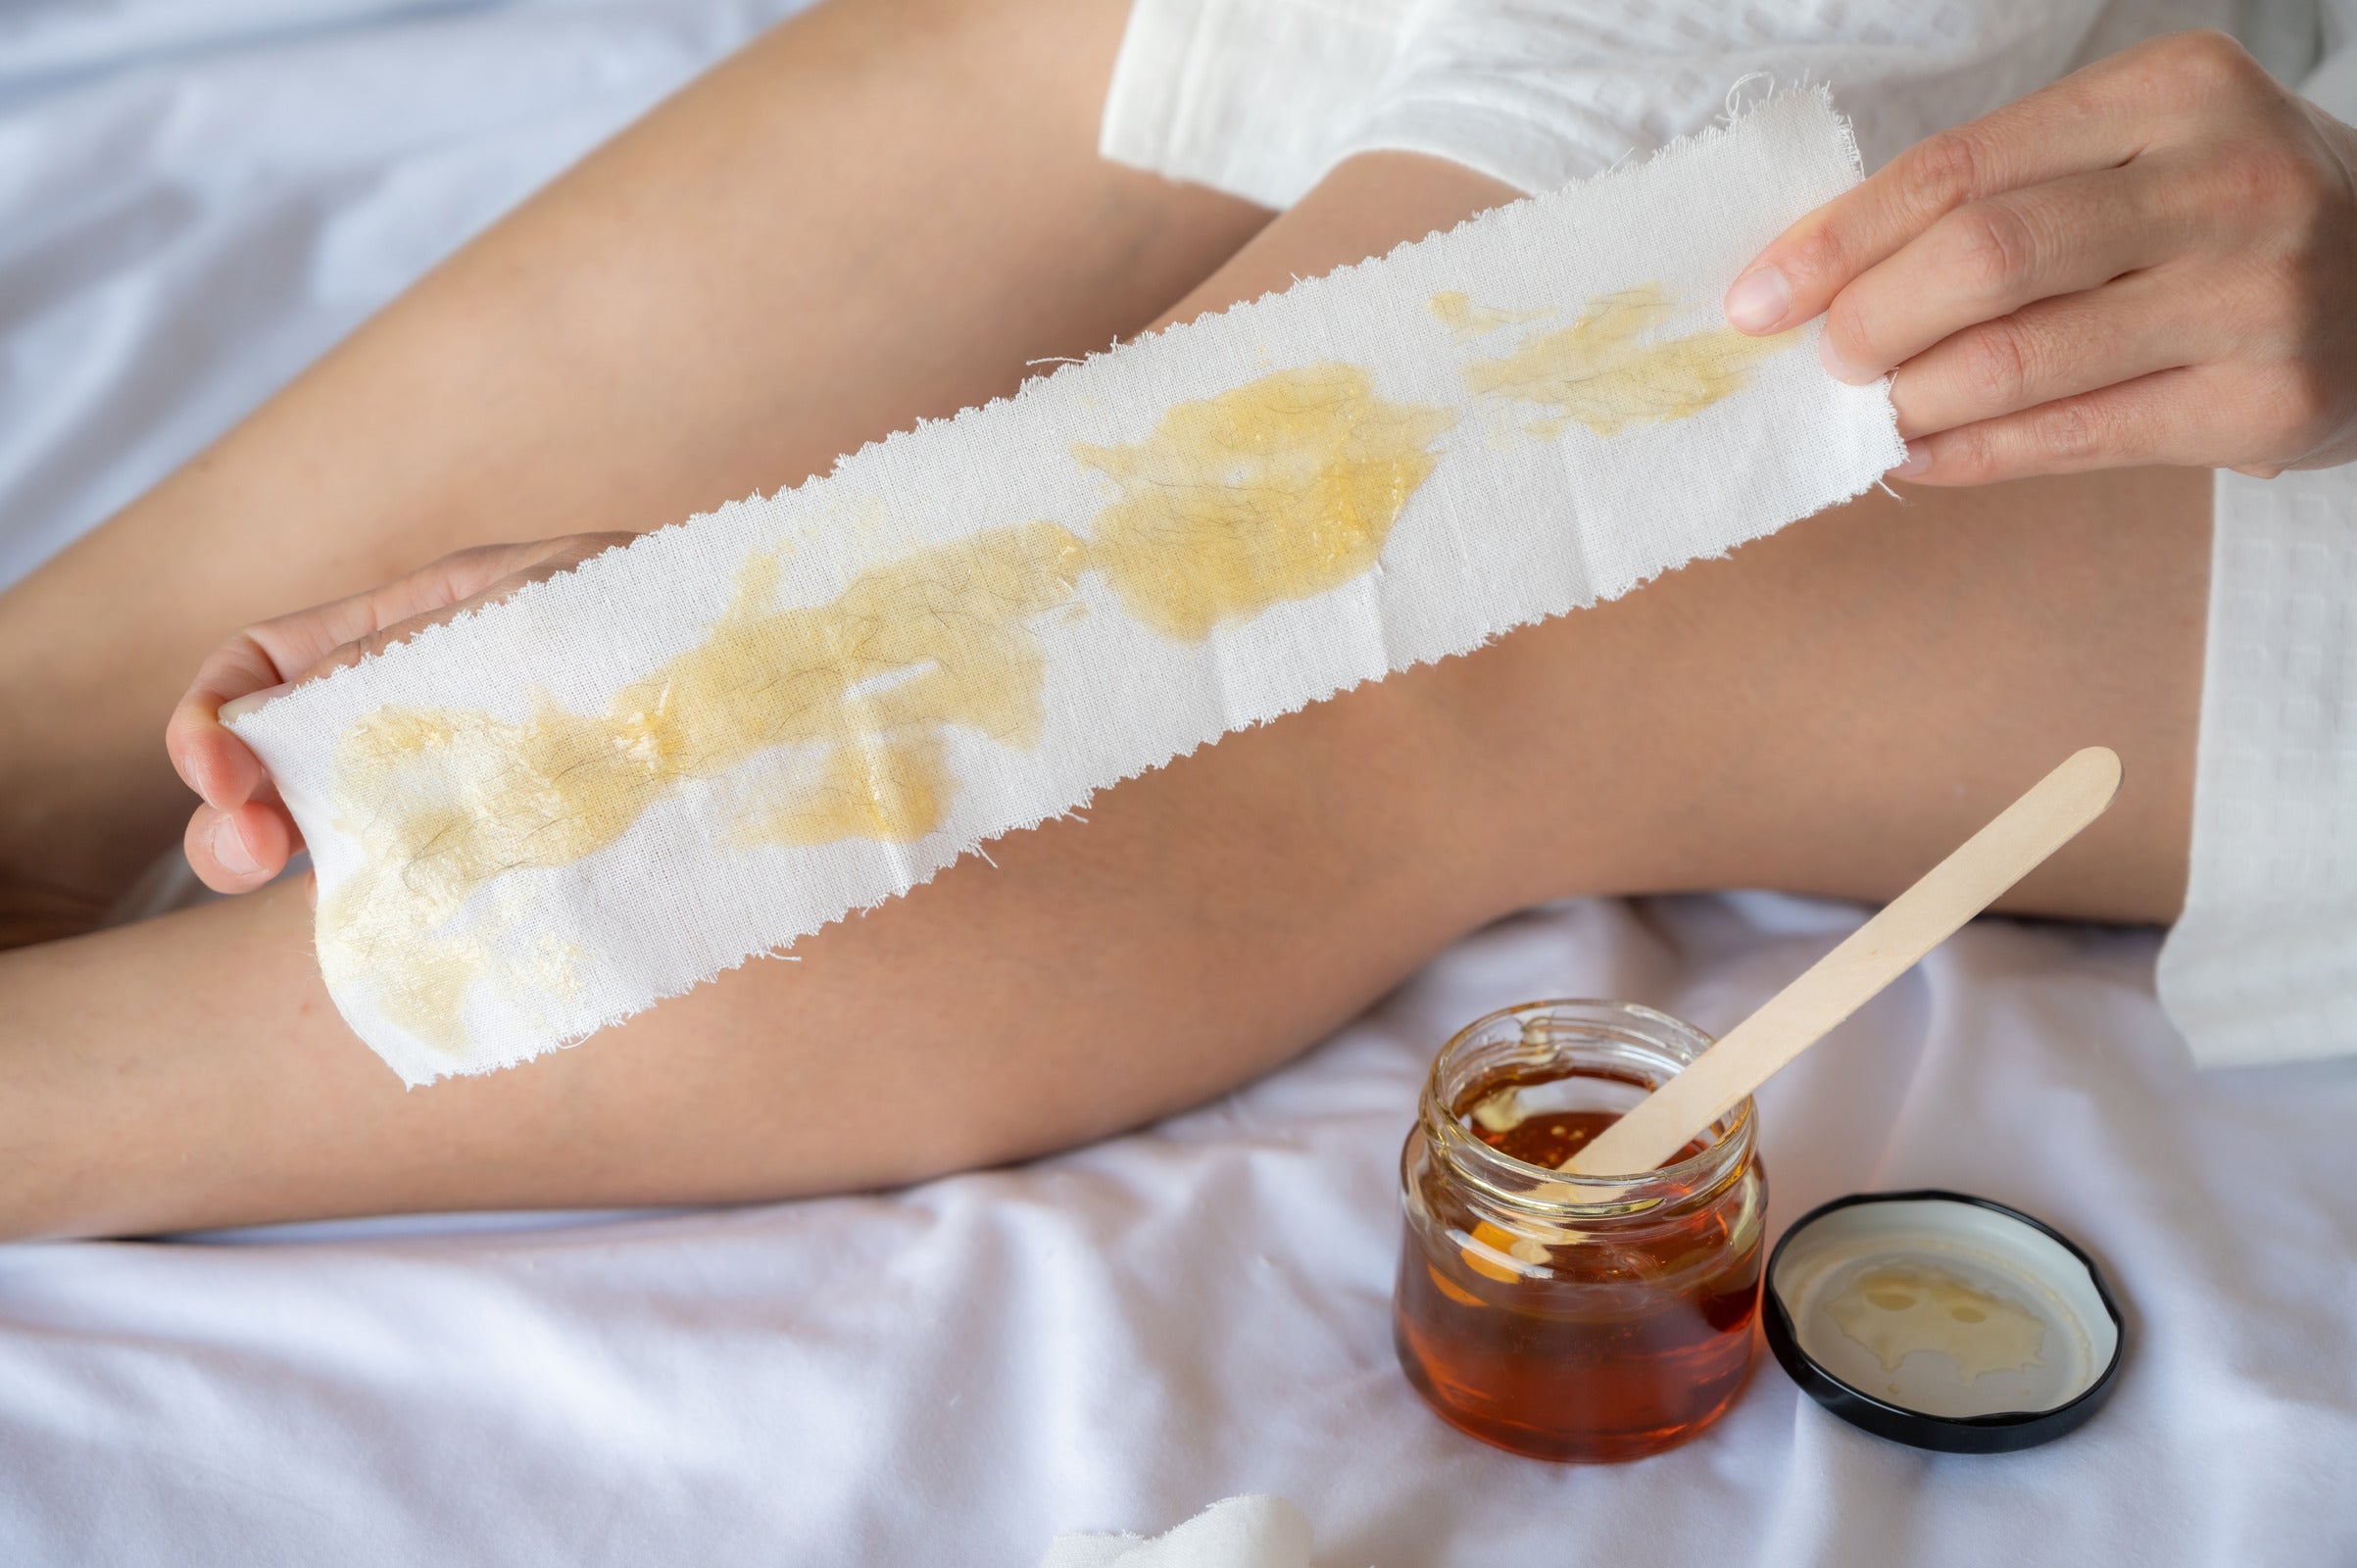 5 Easy Steps to Wax Your Legs at Home